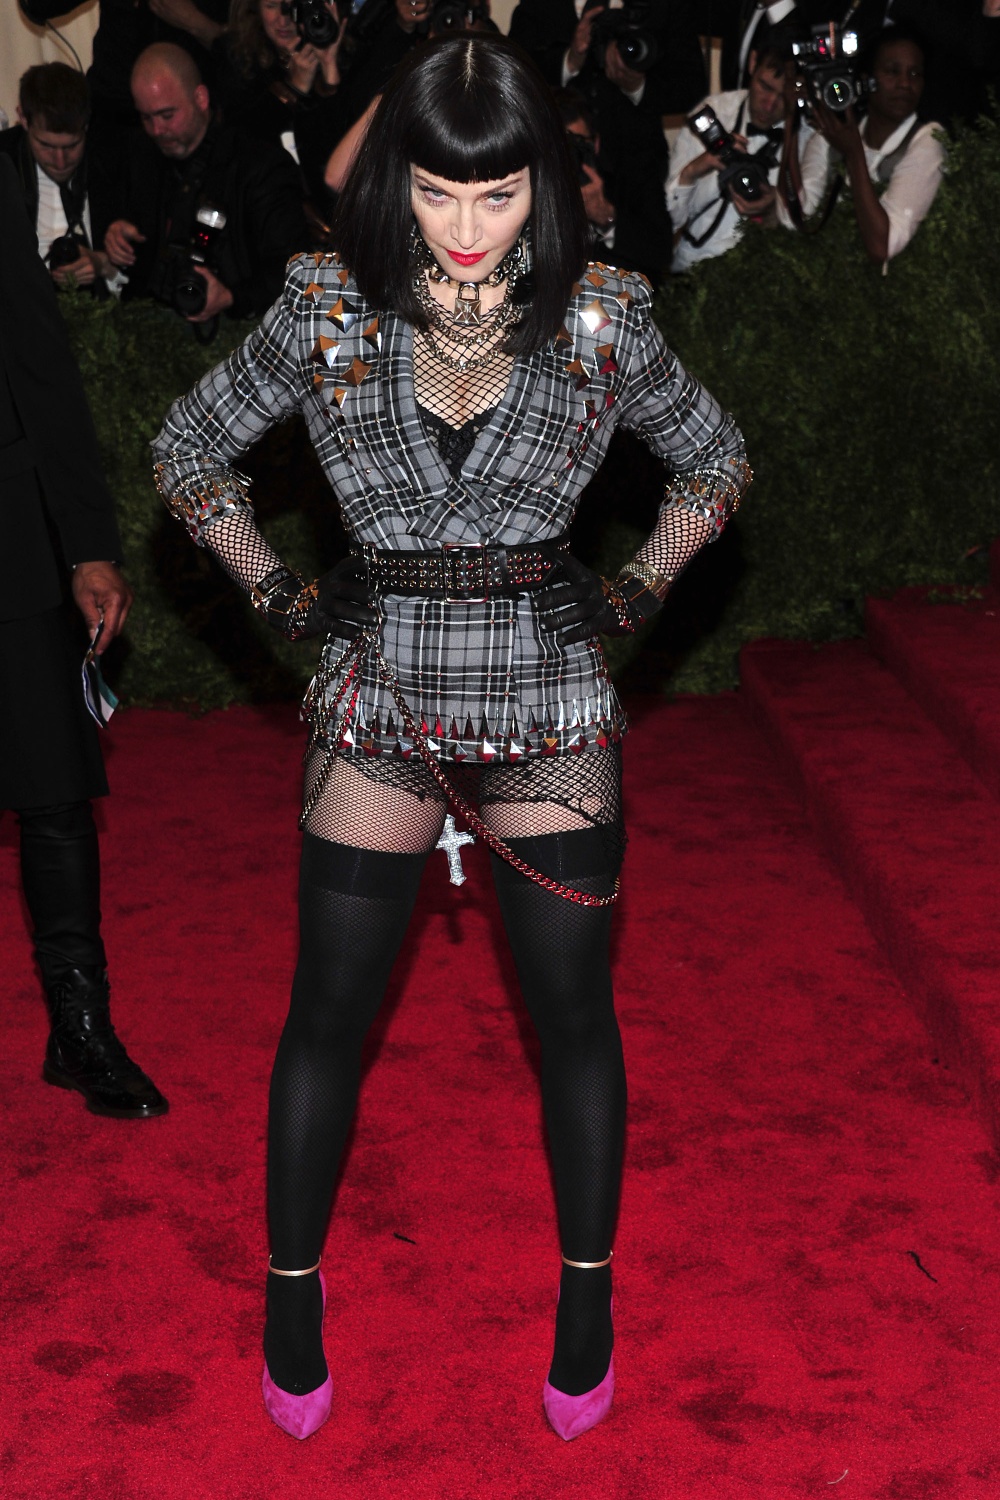 20130507-pictures-madonna-met-gala-moma-